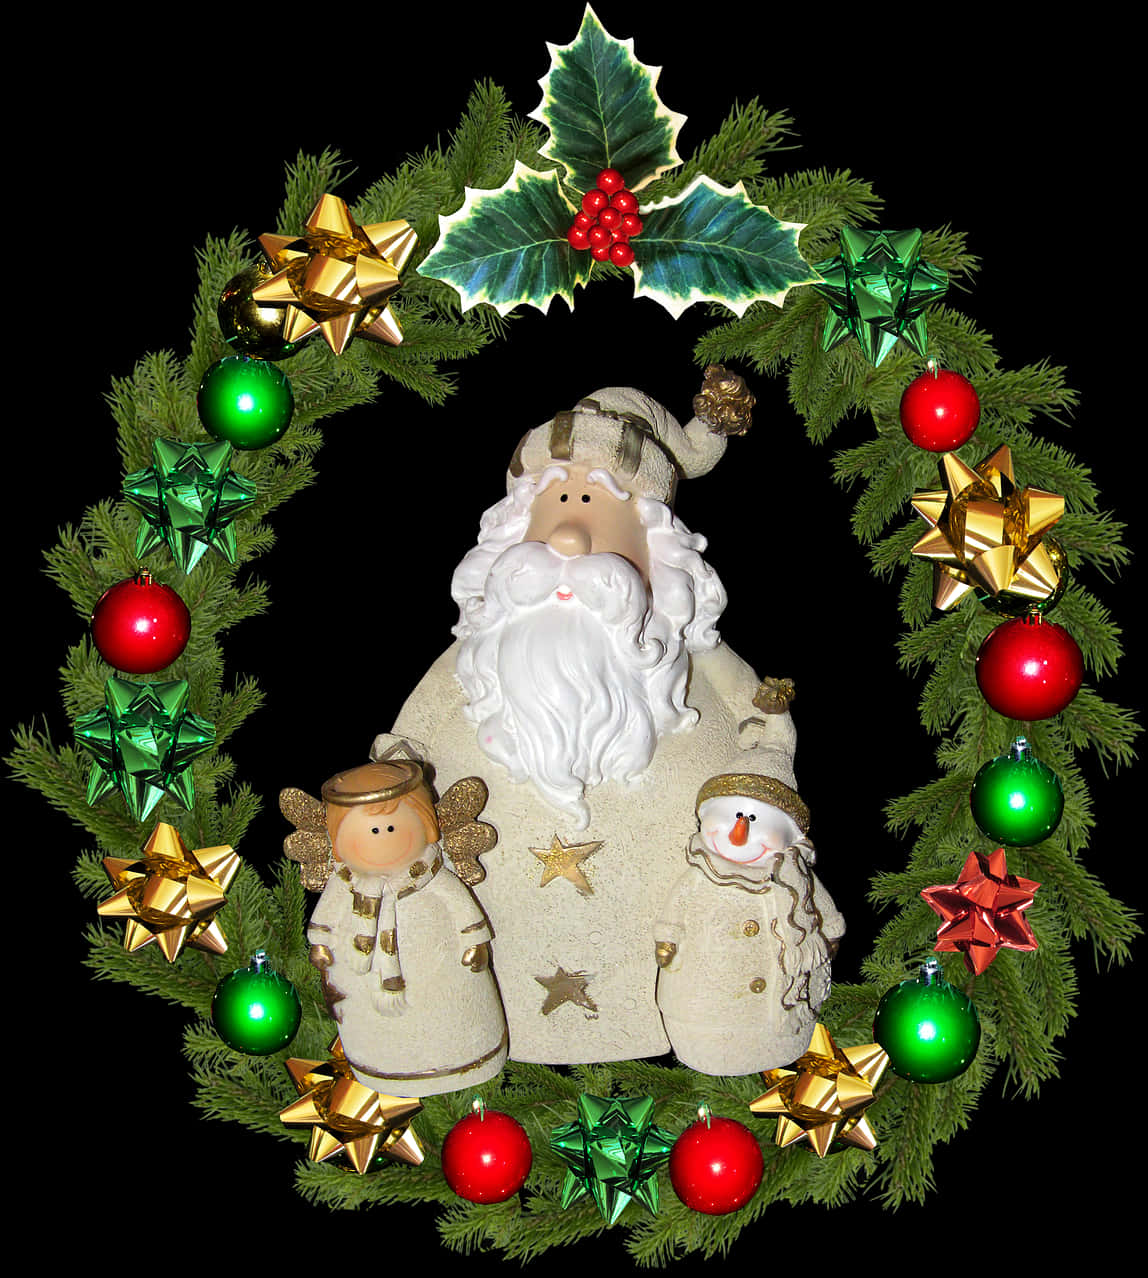 Christmas Wreath With Holiday Figurines